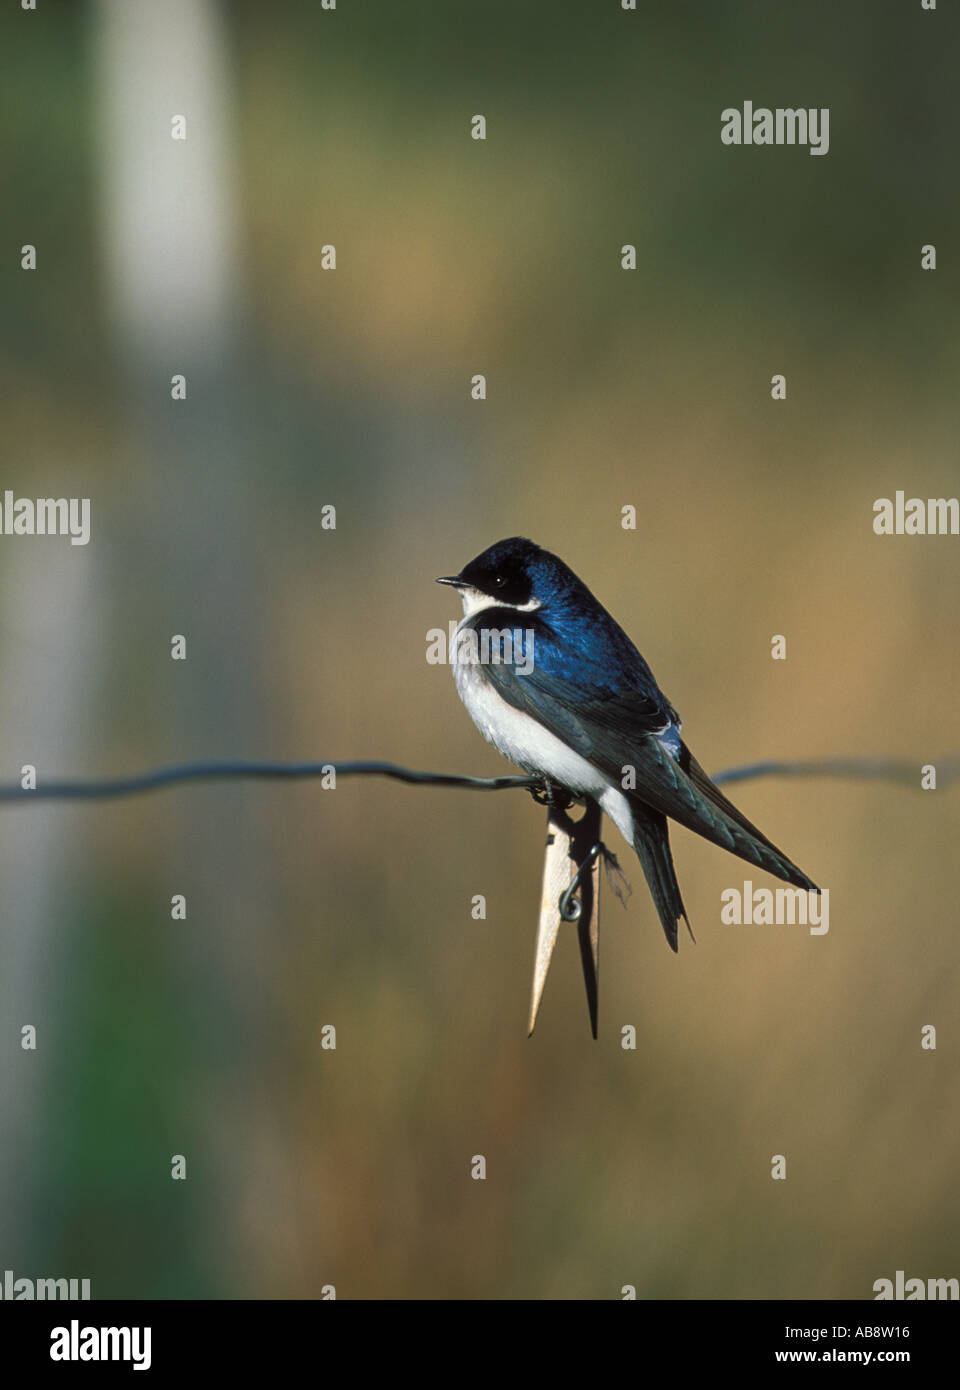 Chilean Swallow on washing line with wooden peg clipped beneath Stock Photo